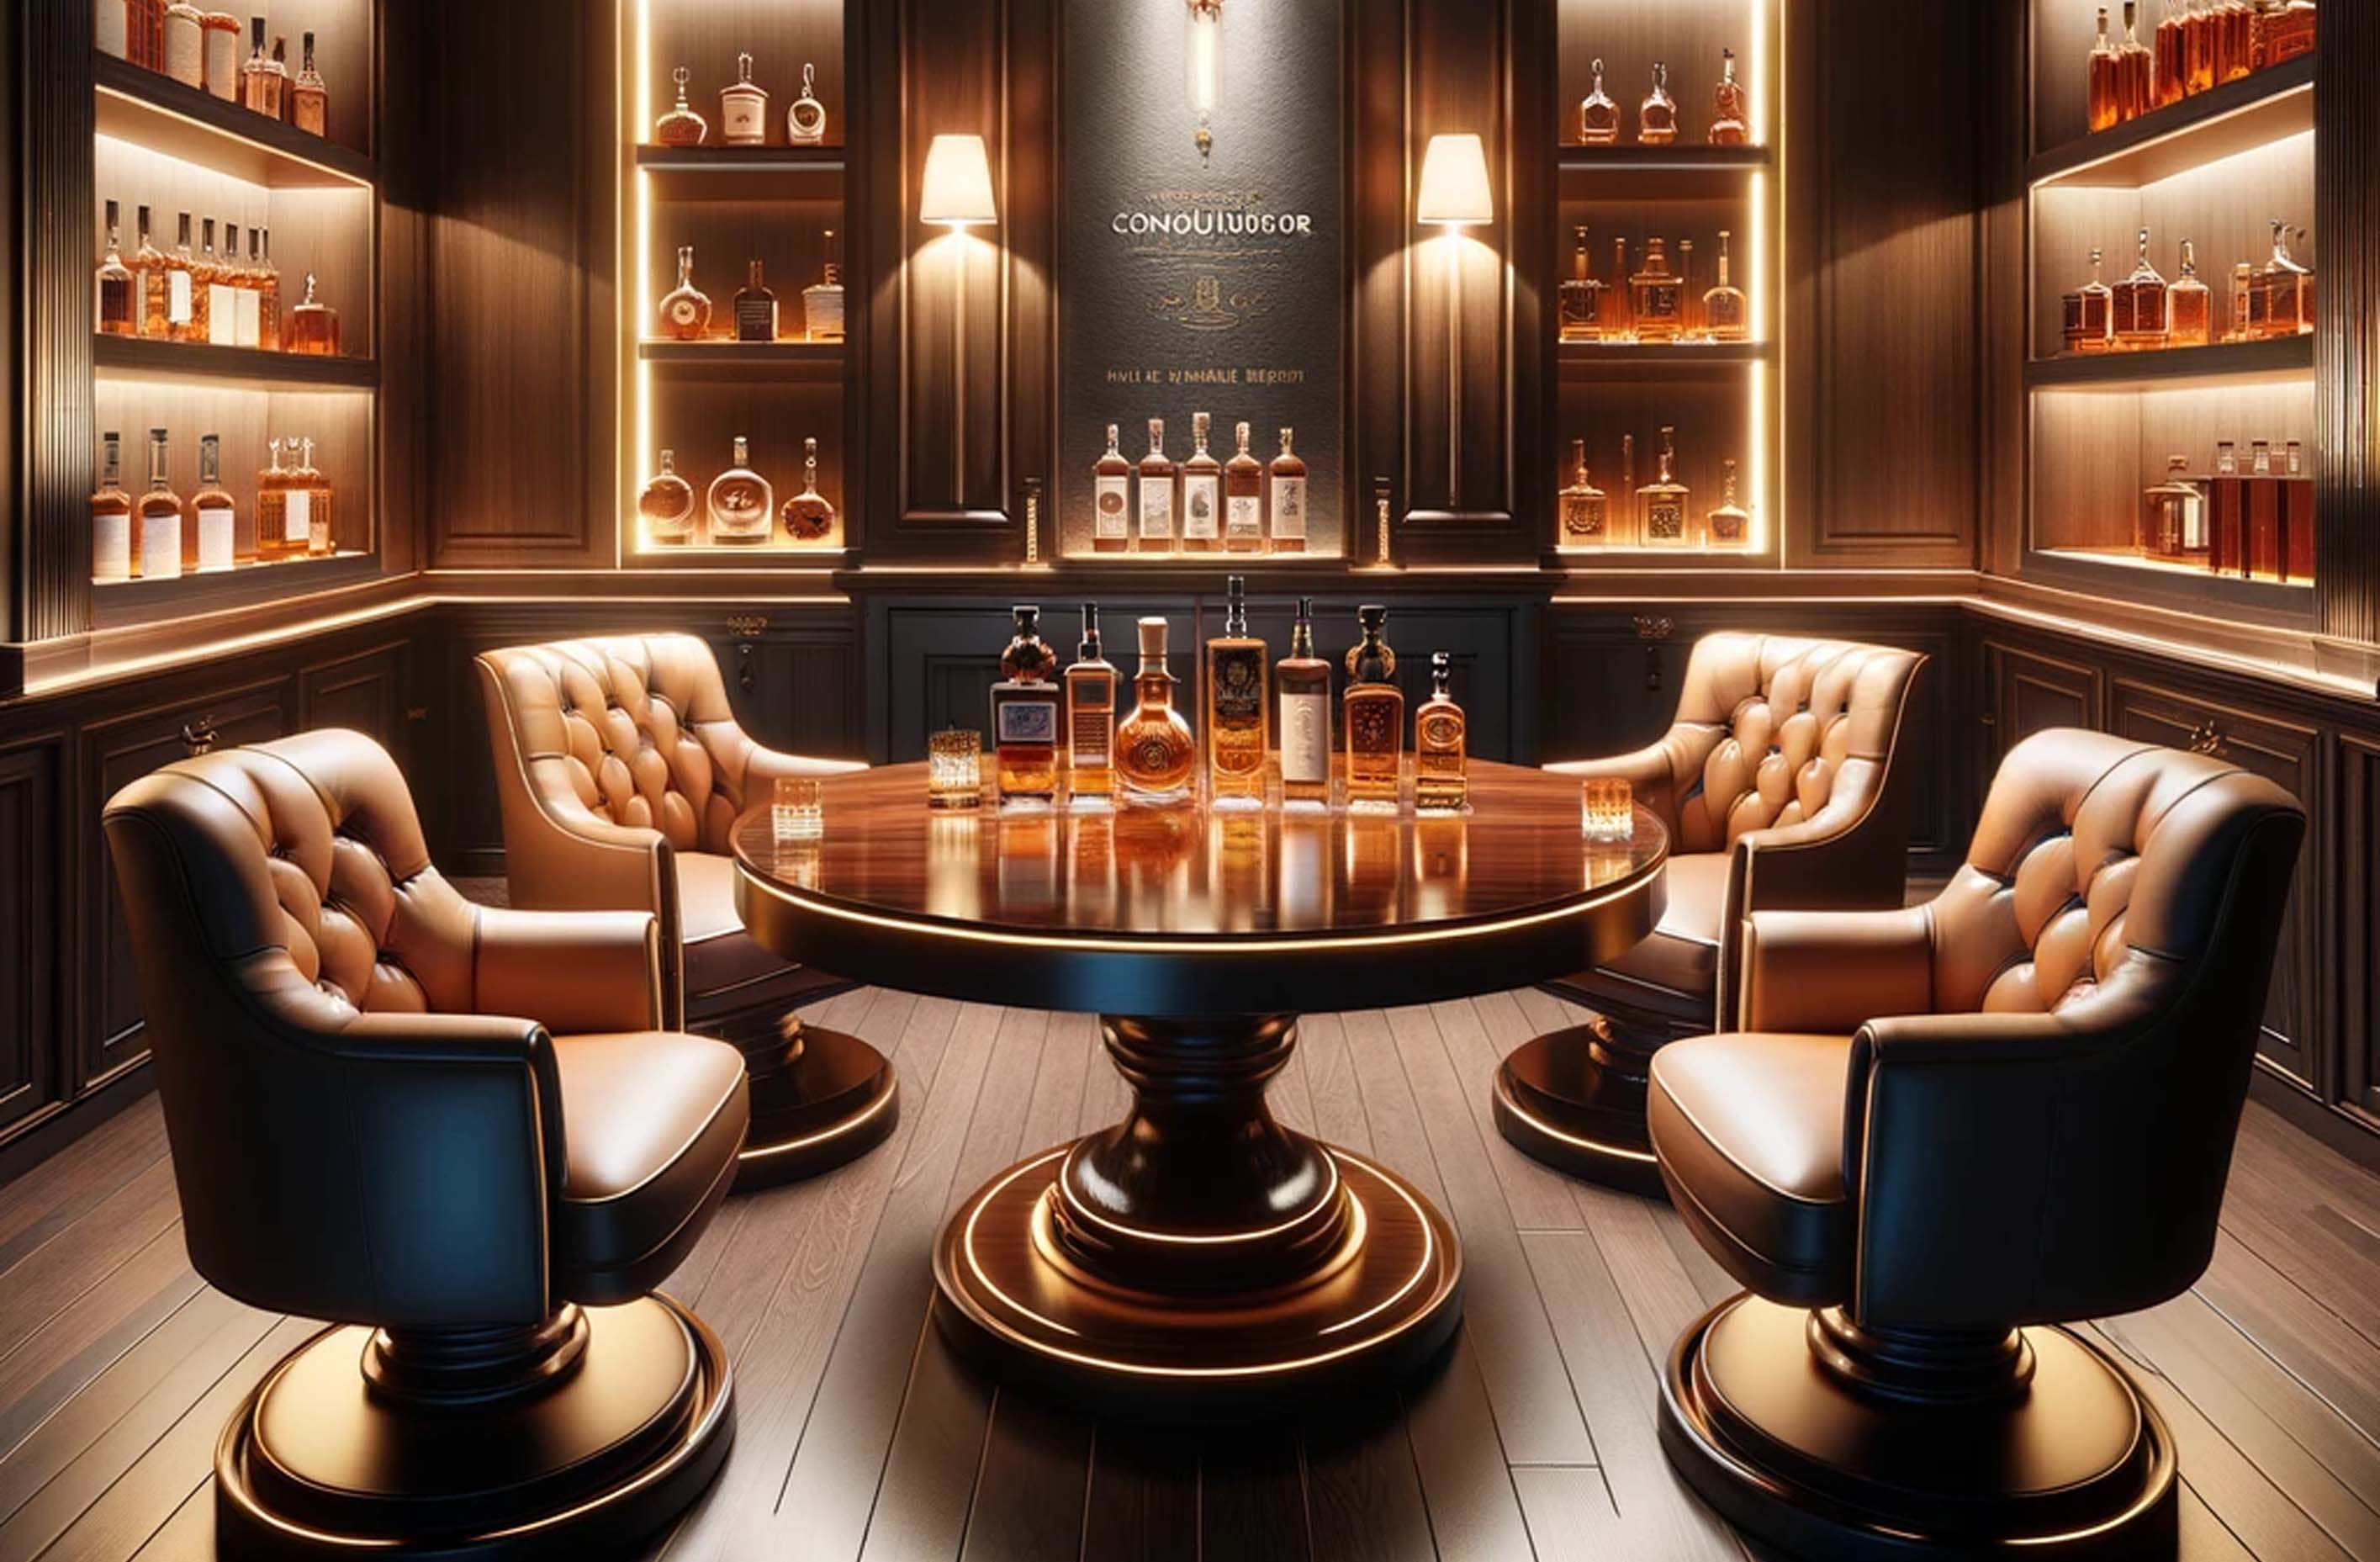 Carbon Heritage showcasing your whiskey lounge getaway for the extreme connoisseur